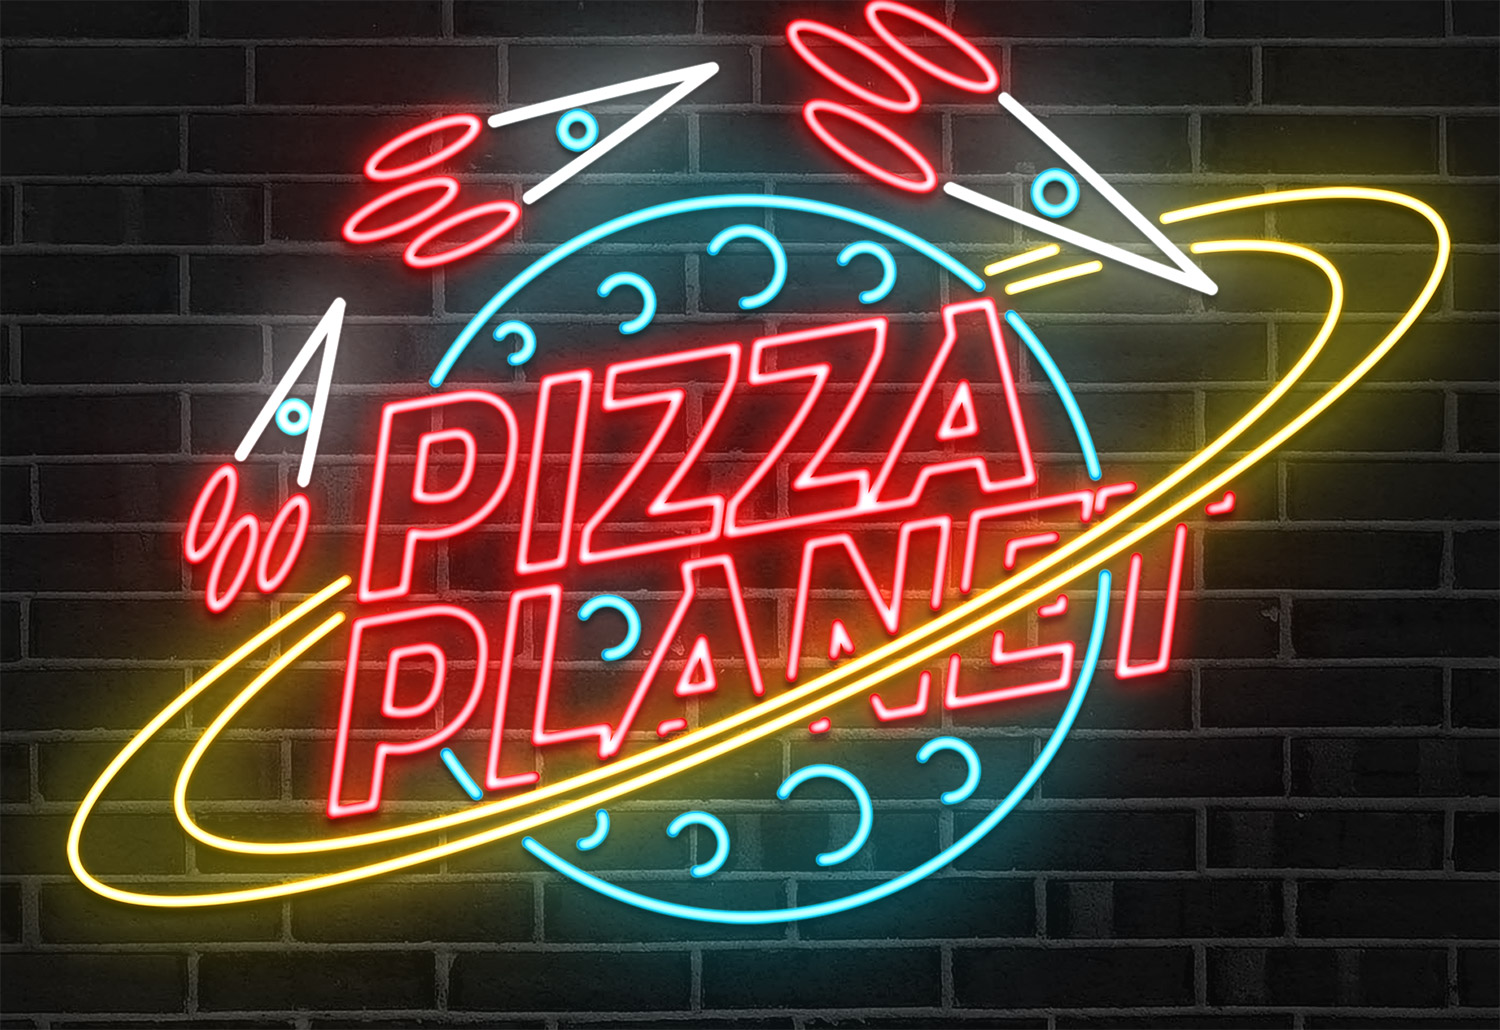 How To Create an Animated Neon Sign Effect